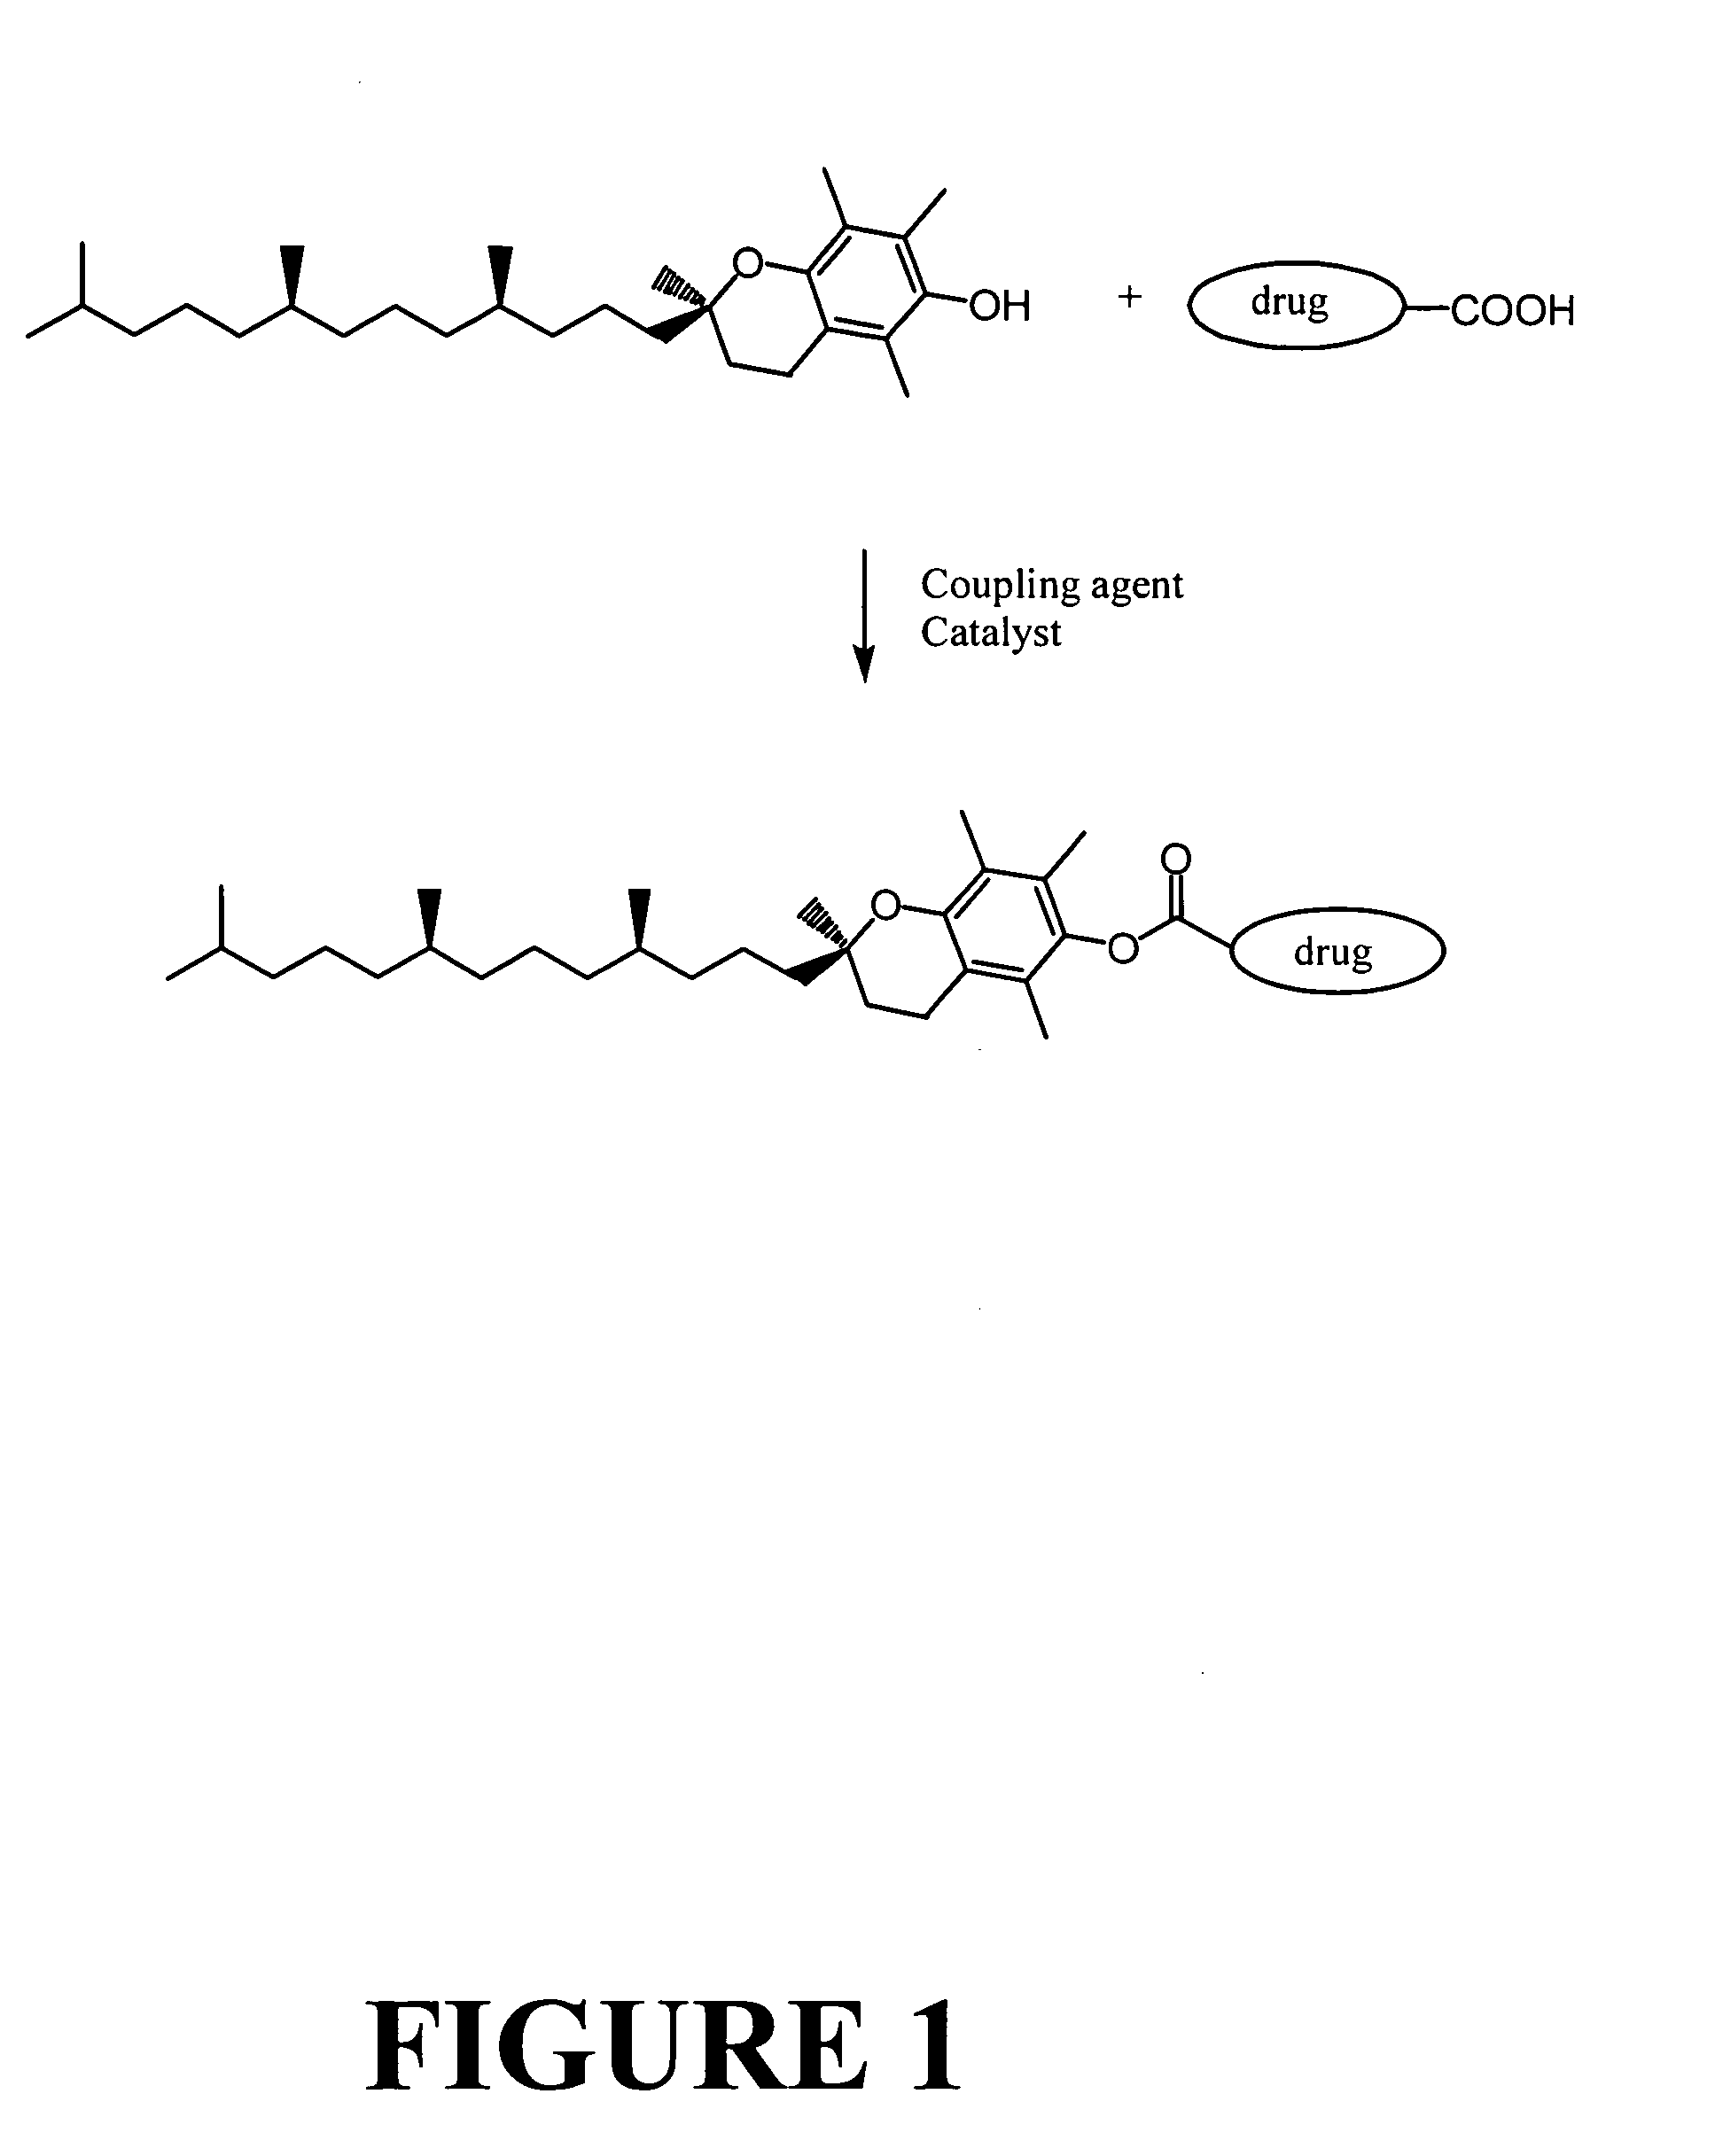 Tocopherol-modified therapeutic drug compounds